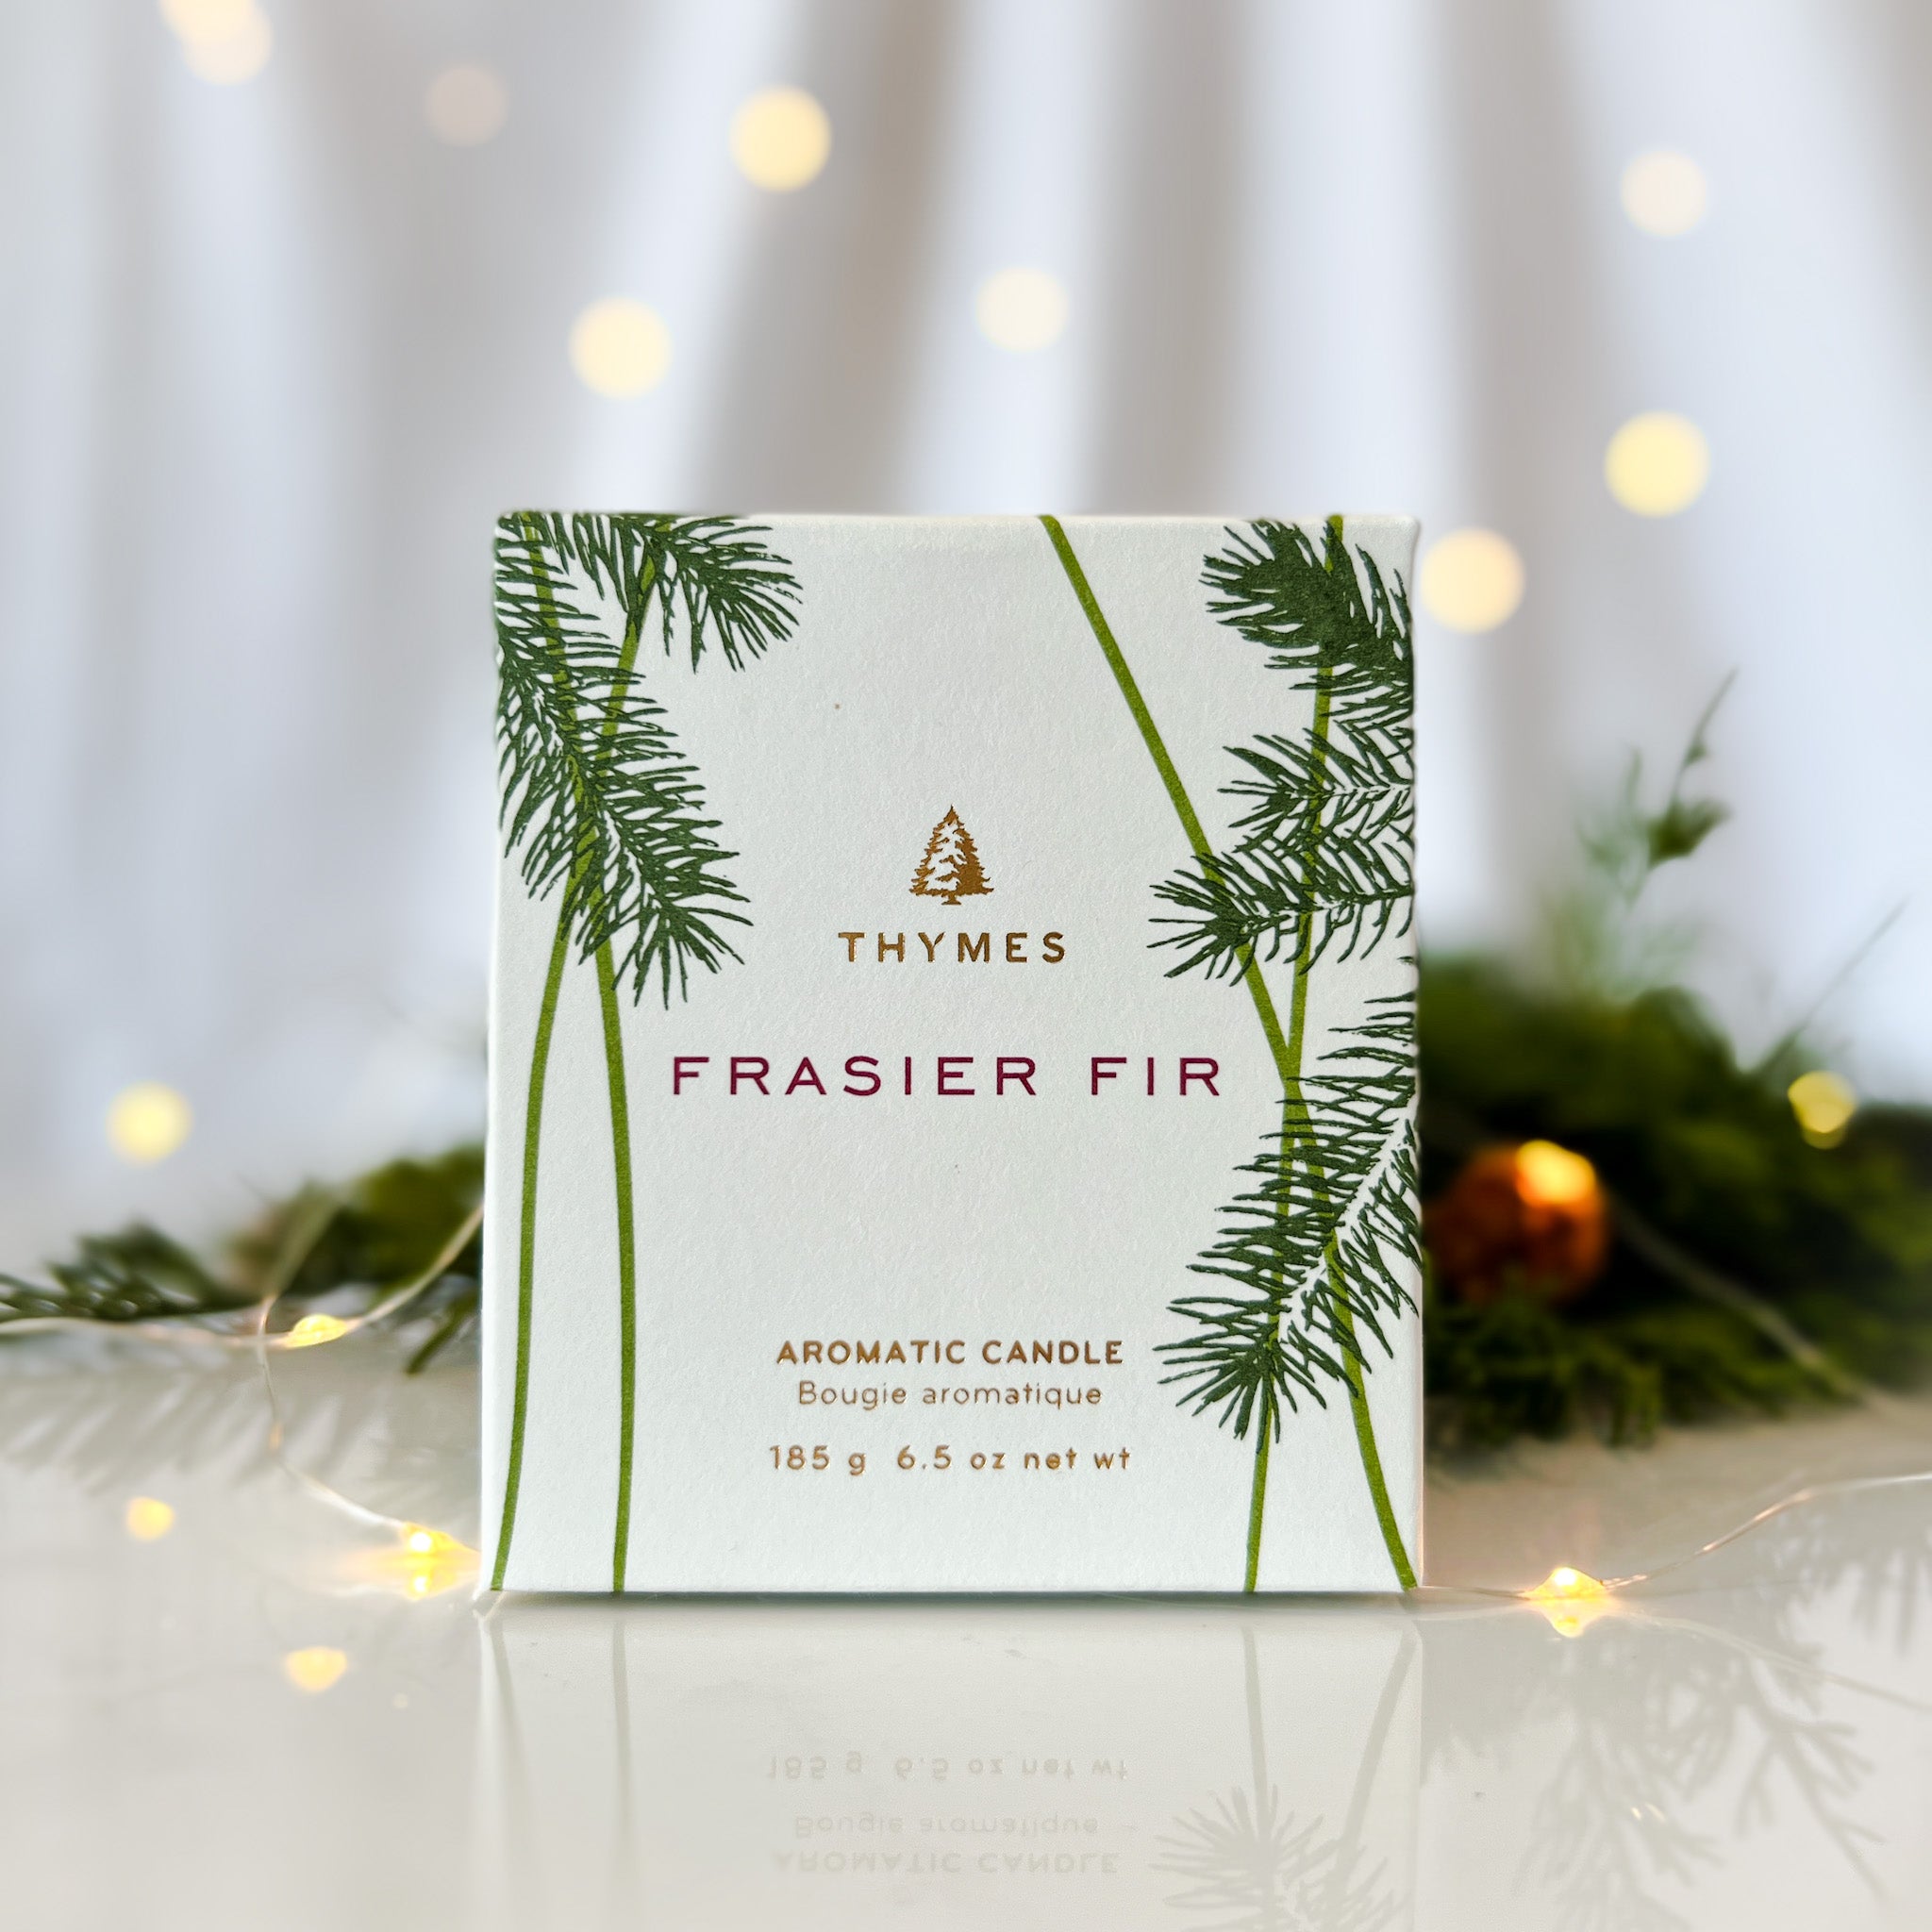 FRASIER FIR PINE NEEDLE CANDLE by THYMES